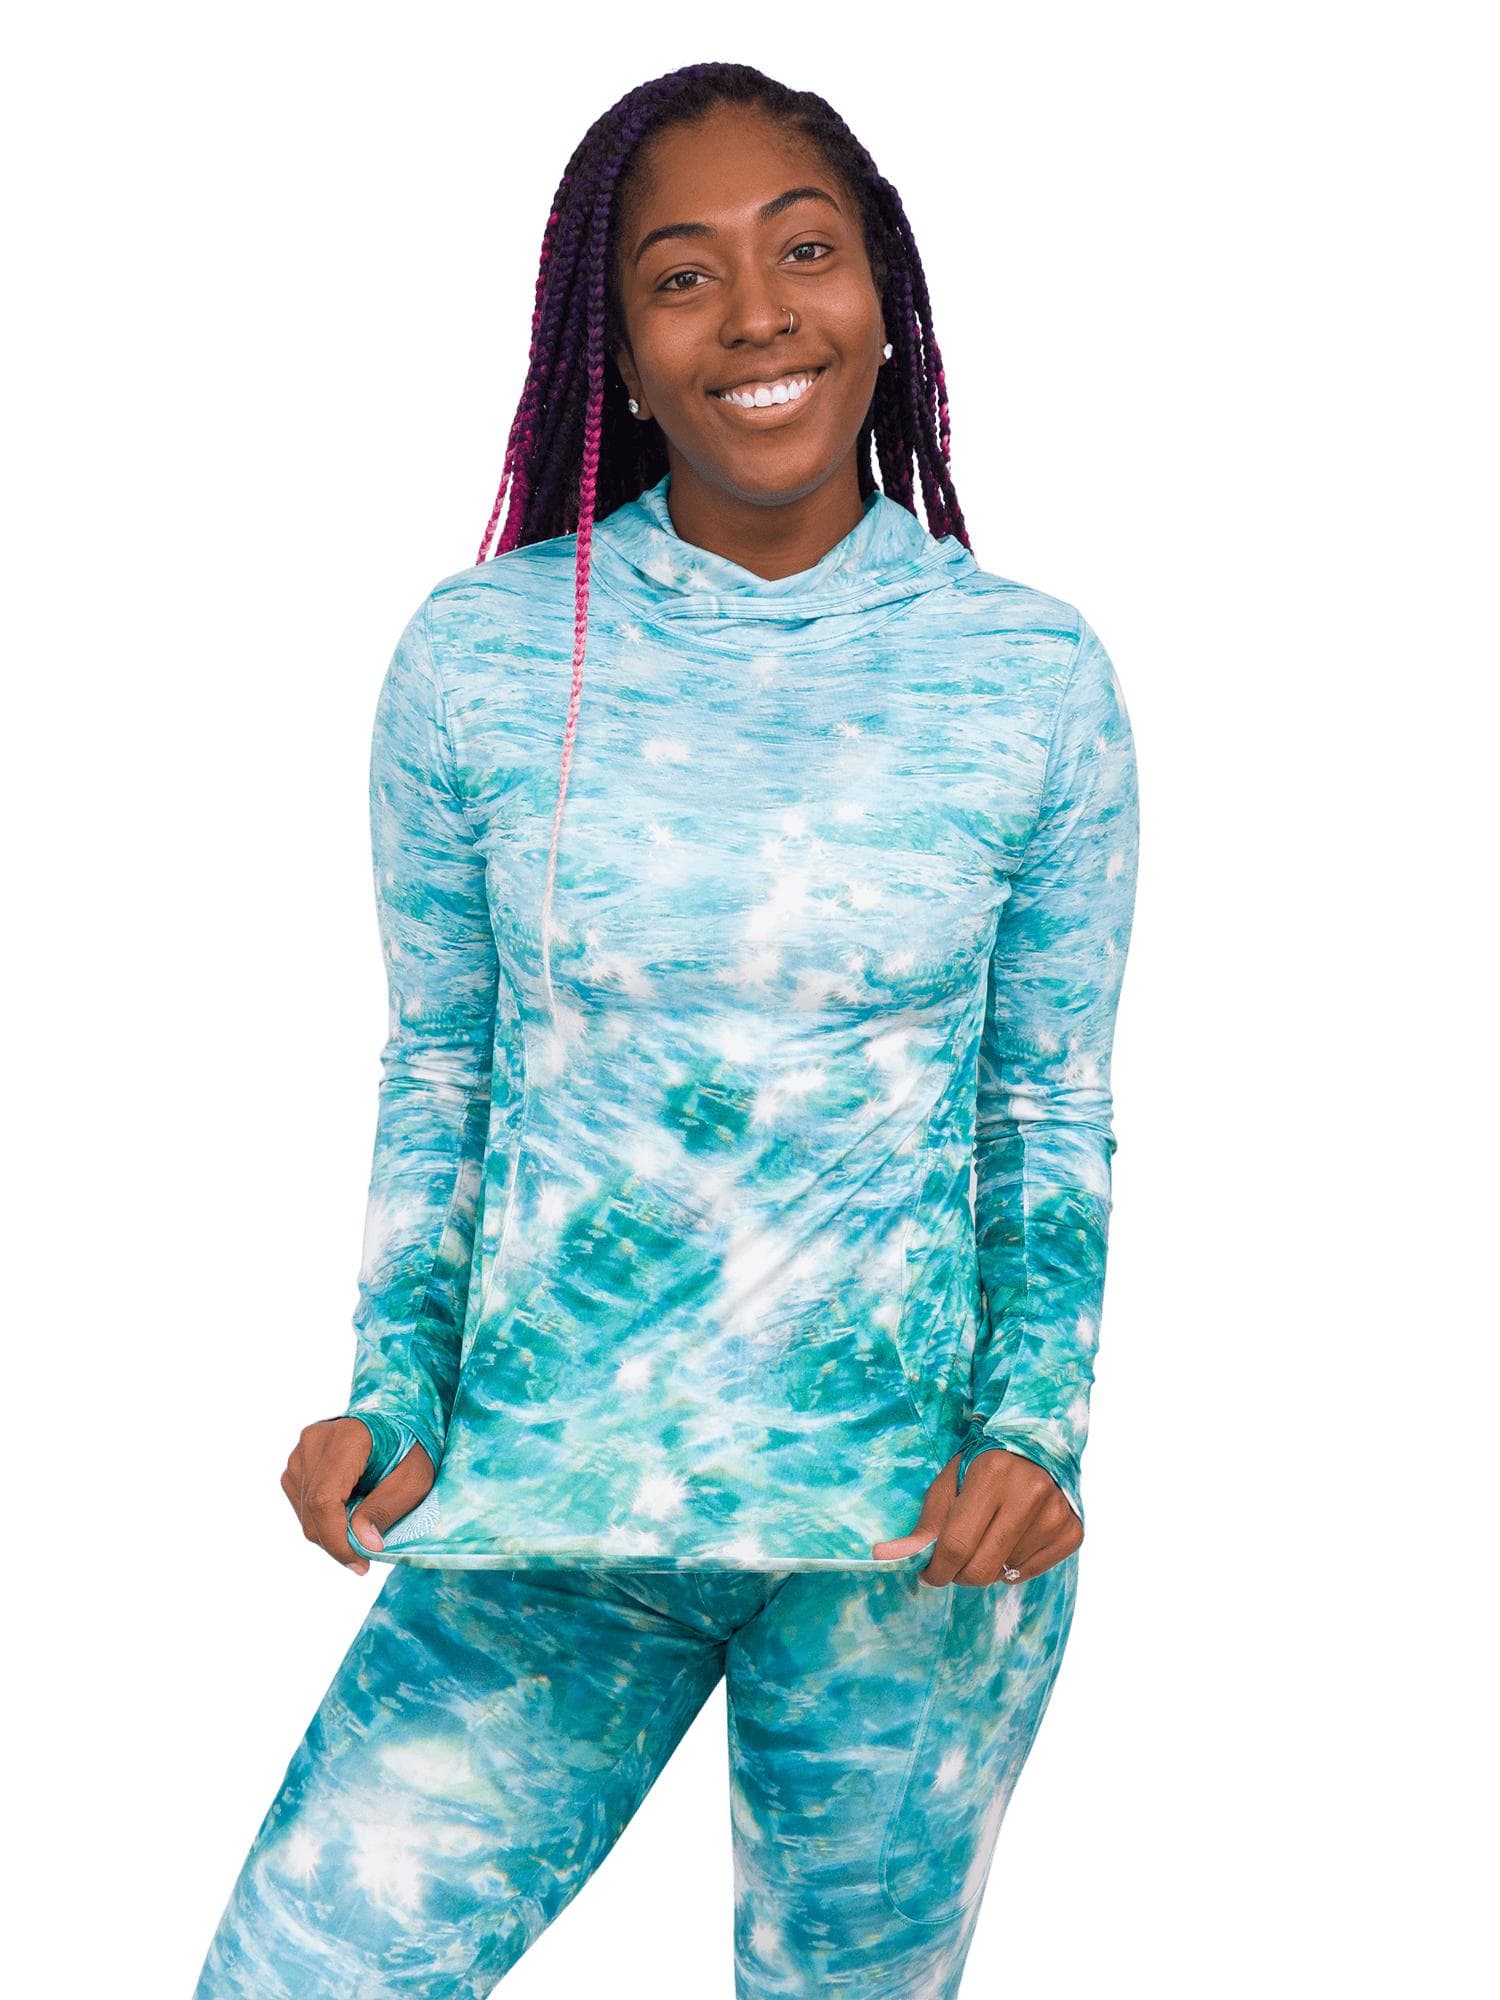 Model: Carlee is a shark & sea turtle scientist and co-founder of Minorities in Shark Sciences. She is 5’7”, 145 lbs, 36C and is wearing a S sun shirt and M legging.